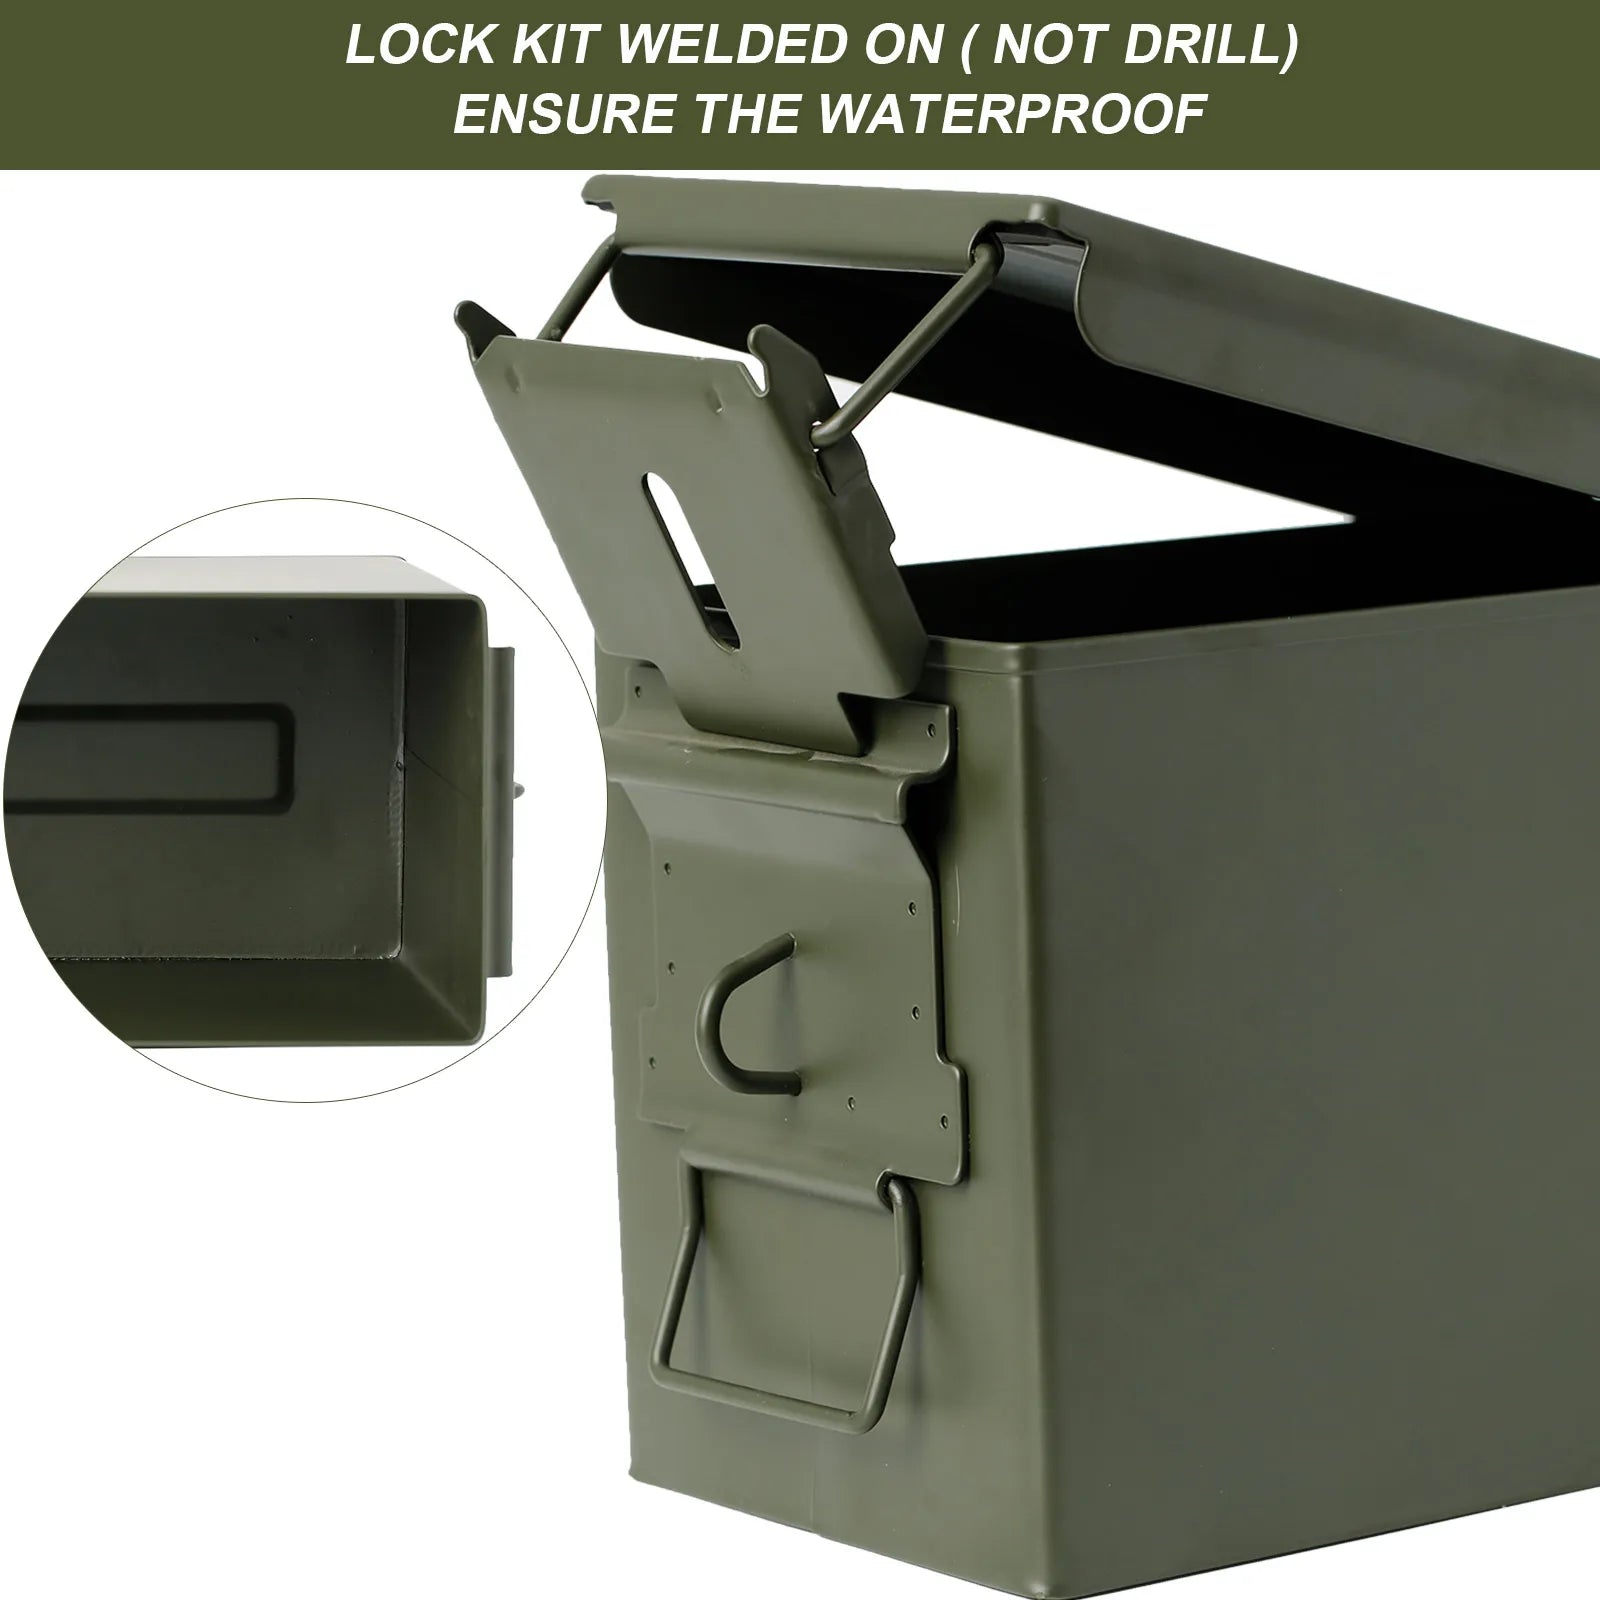 50 Cal Metal Lockable Ammo Can